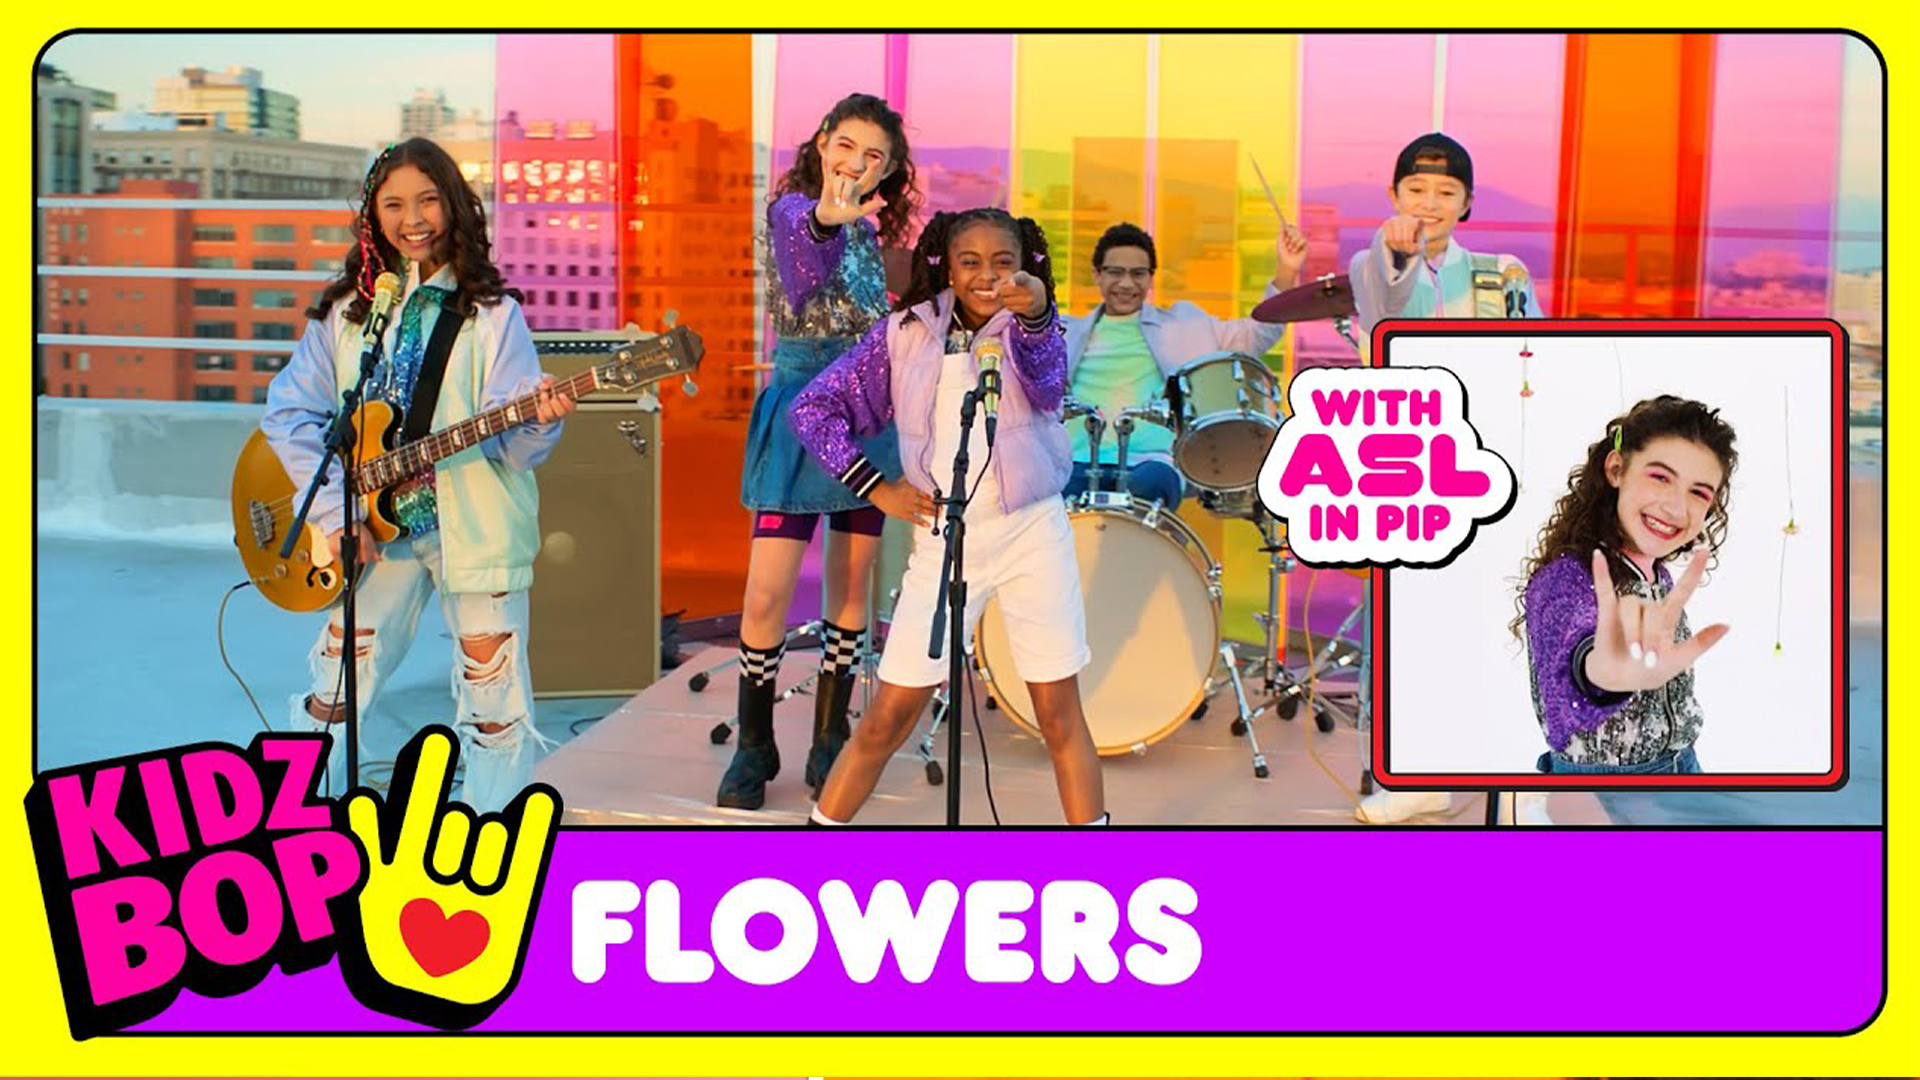 You should watch the Flowers video! It's a relentlessly cheery bop that will have you dancing in no time!